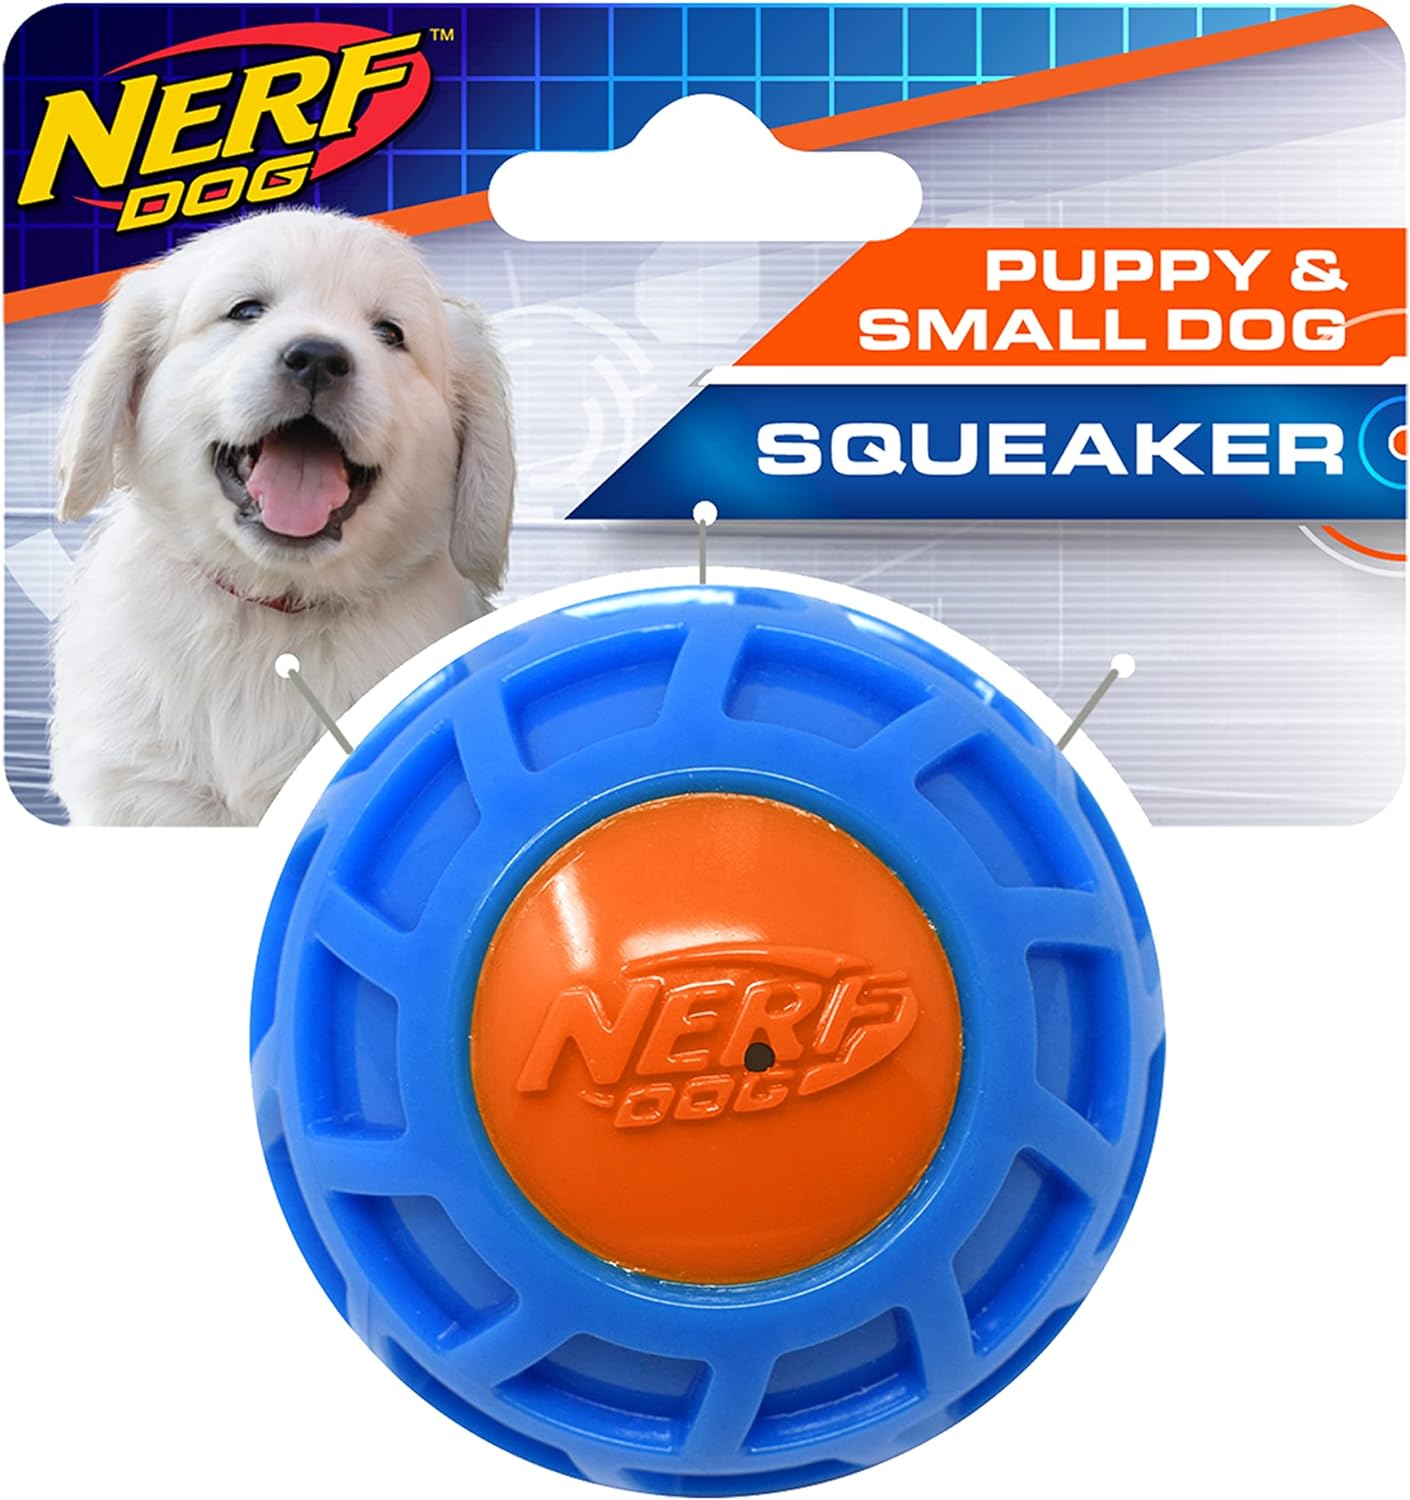 Very durable. Was easy for smaller dogs to catch. Grooved outer portion with a ball in middle